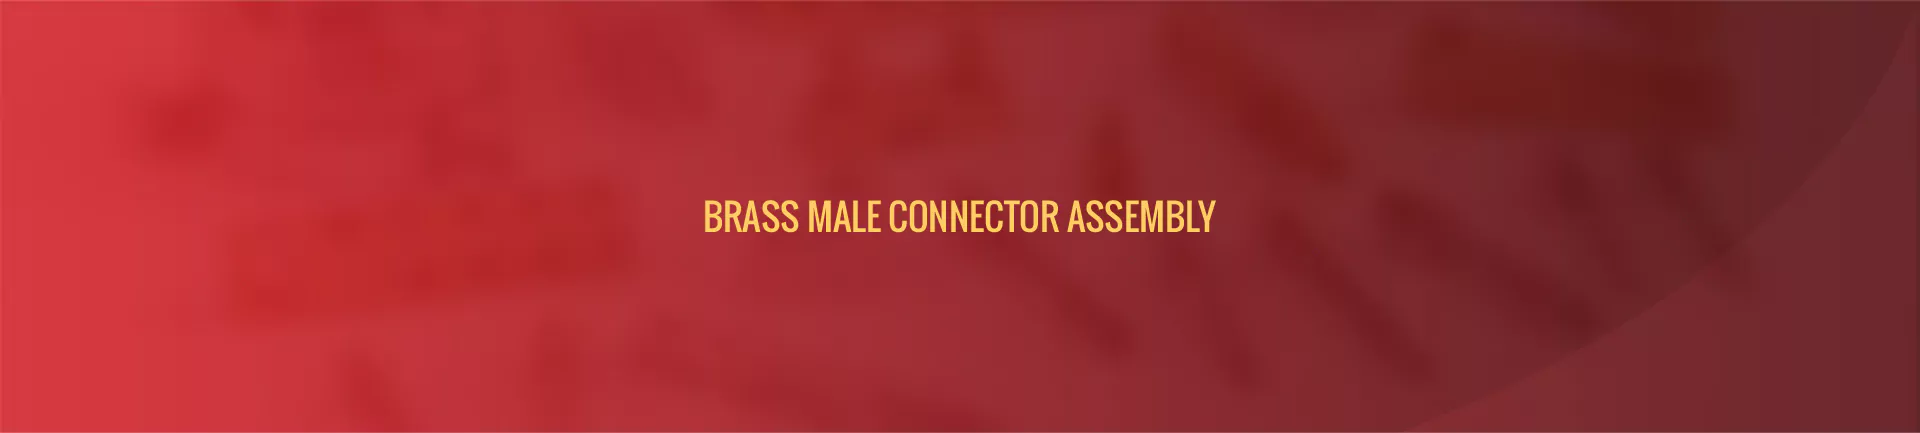 brass_male_connector_assembly-banner